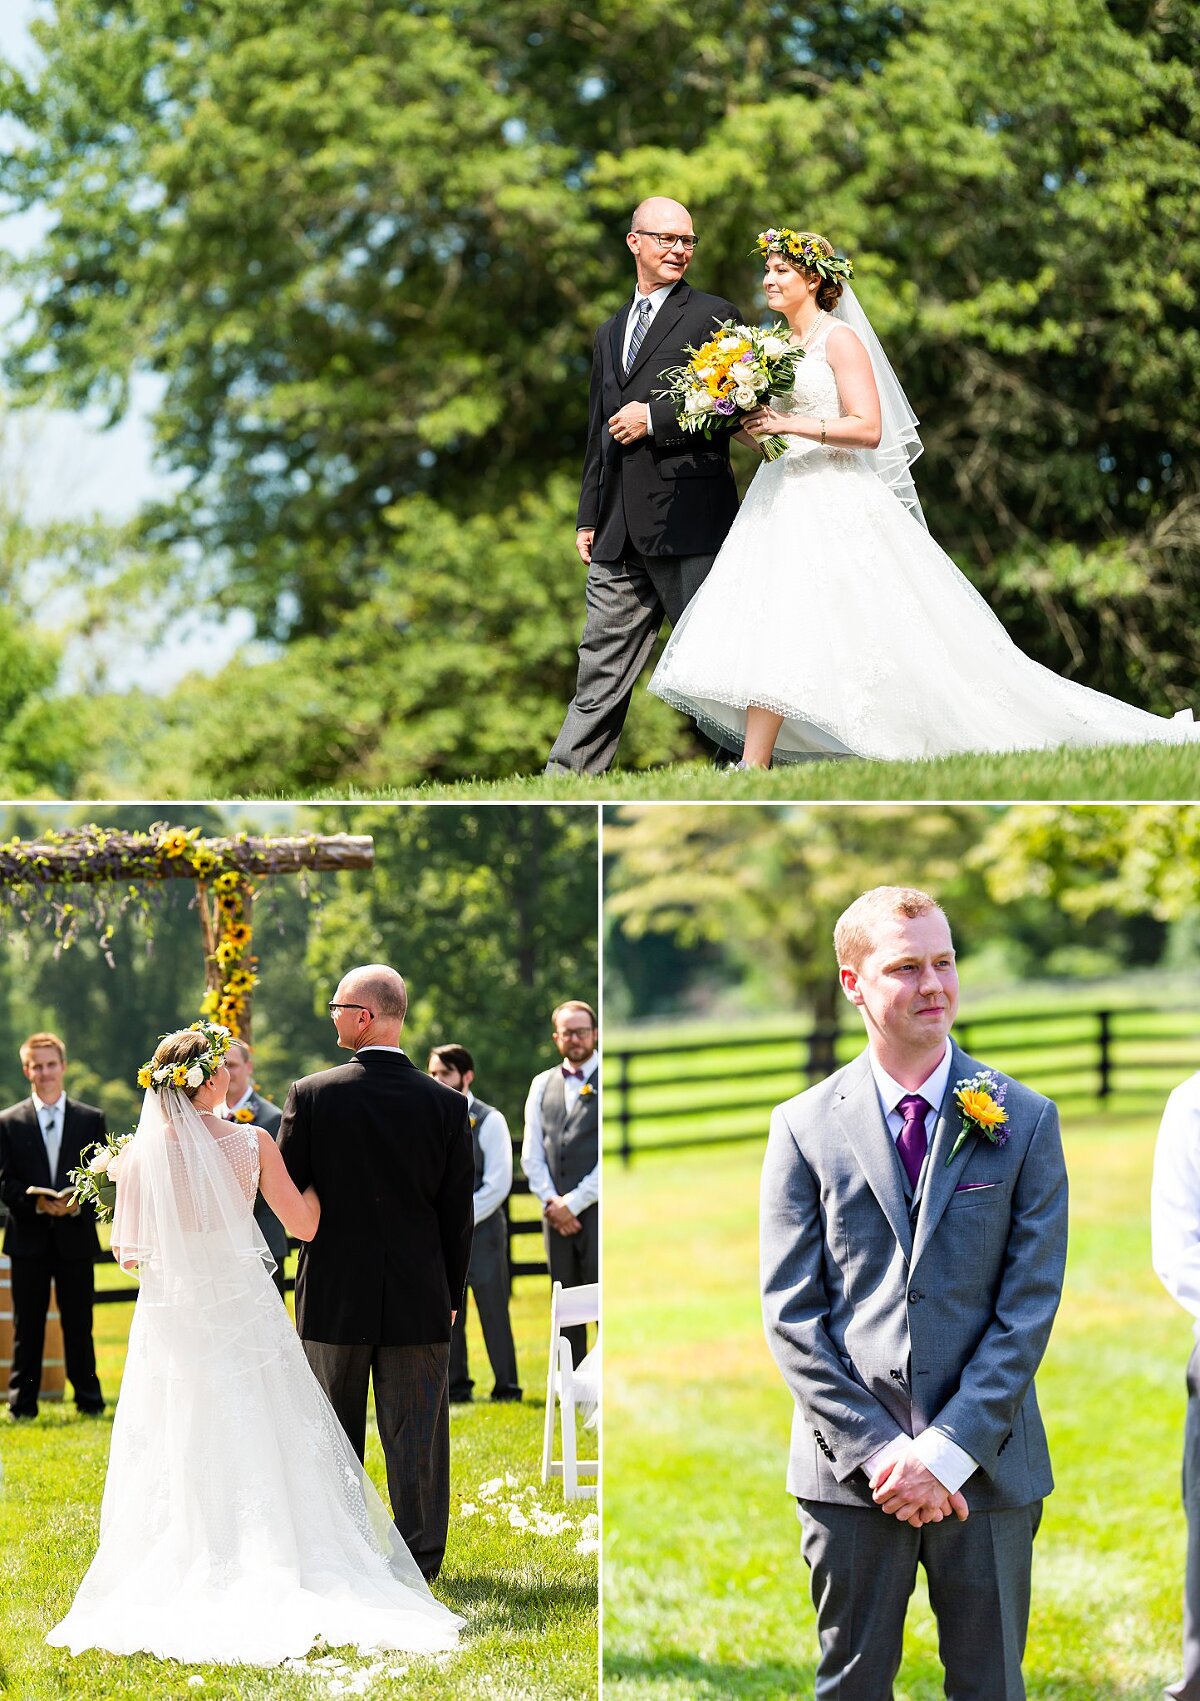 Check out this BEAUTIFUL VIRGINIA WEDDING!! This summer wedding was at The Oak Barn at Loyalty in Leesburg, Virginia. The rolling hills, hay bales, and beautiful barn venue was gorgeous! Photographed by Bethanie Vetter Photography LLC. #oakbarnatloyalty #theoakbarnatloyalty #theoakbarn #virginiawedding #summerwedding #julywedding #weddingphotos #weddingphotography